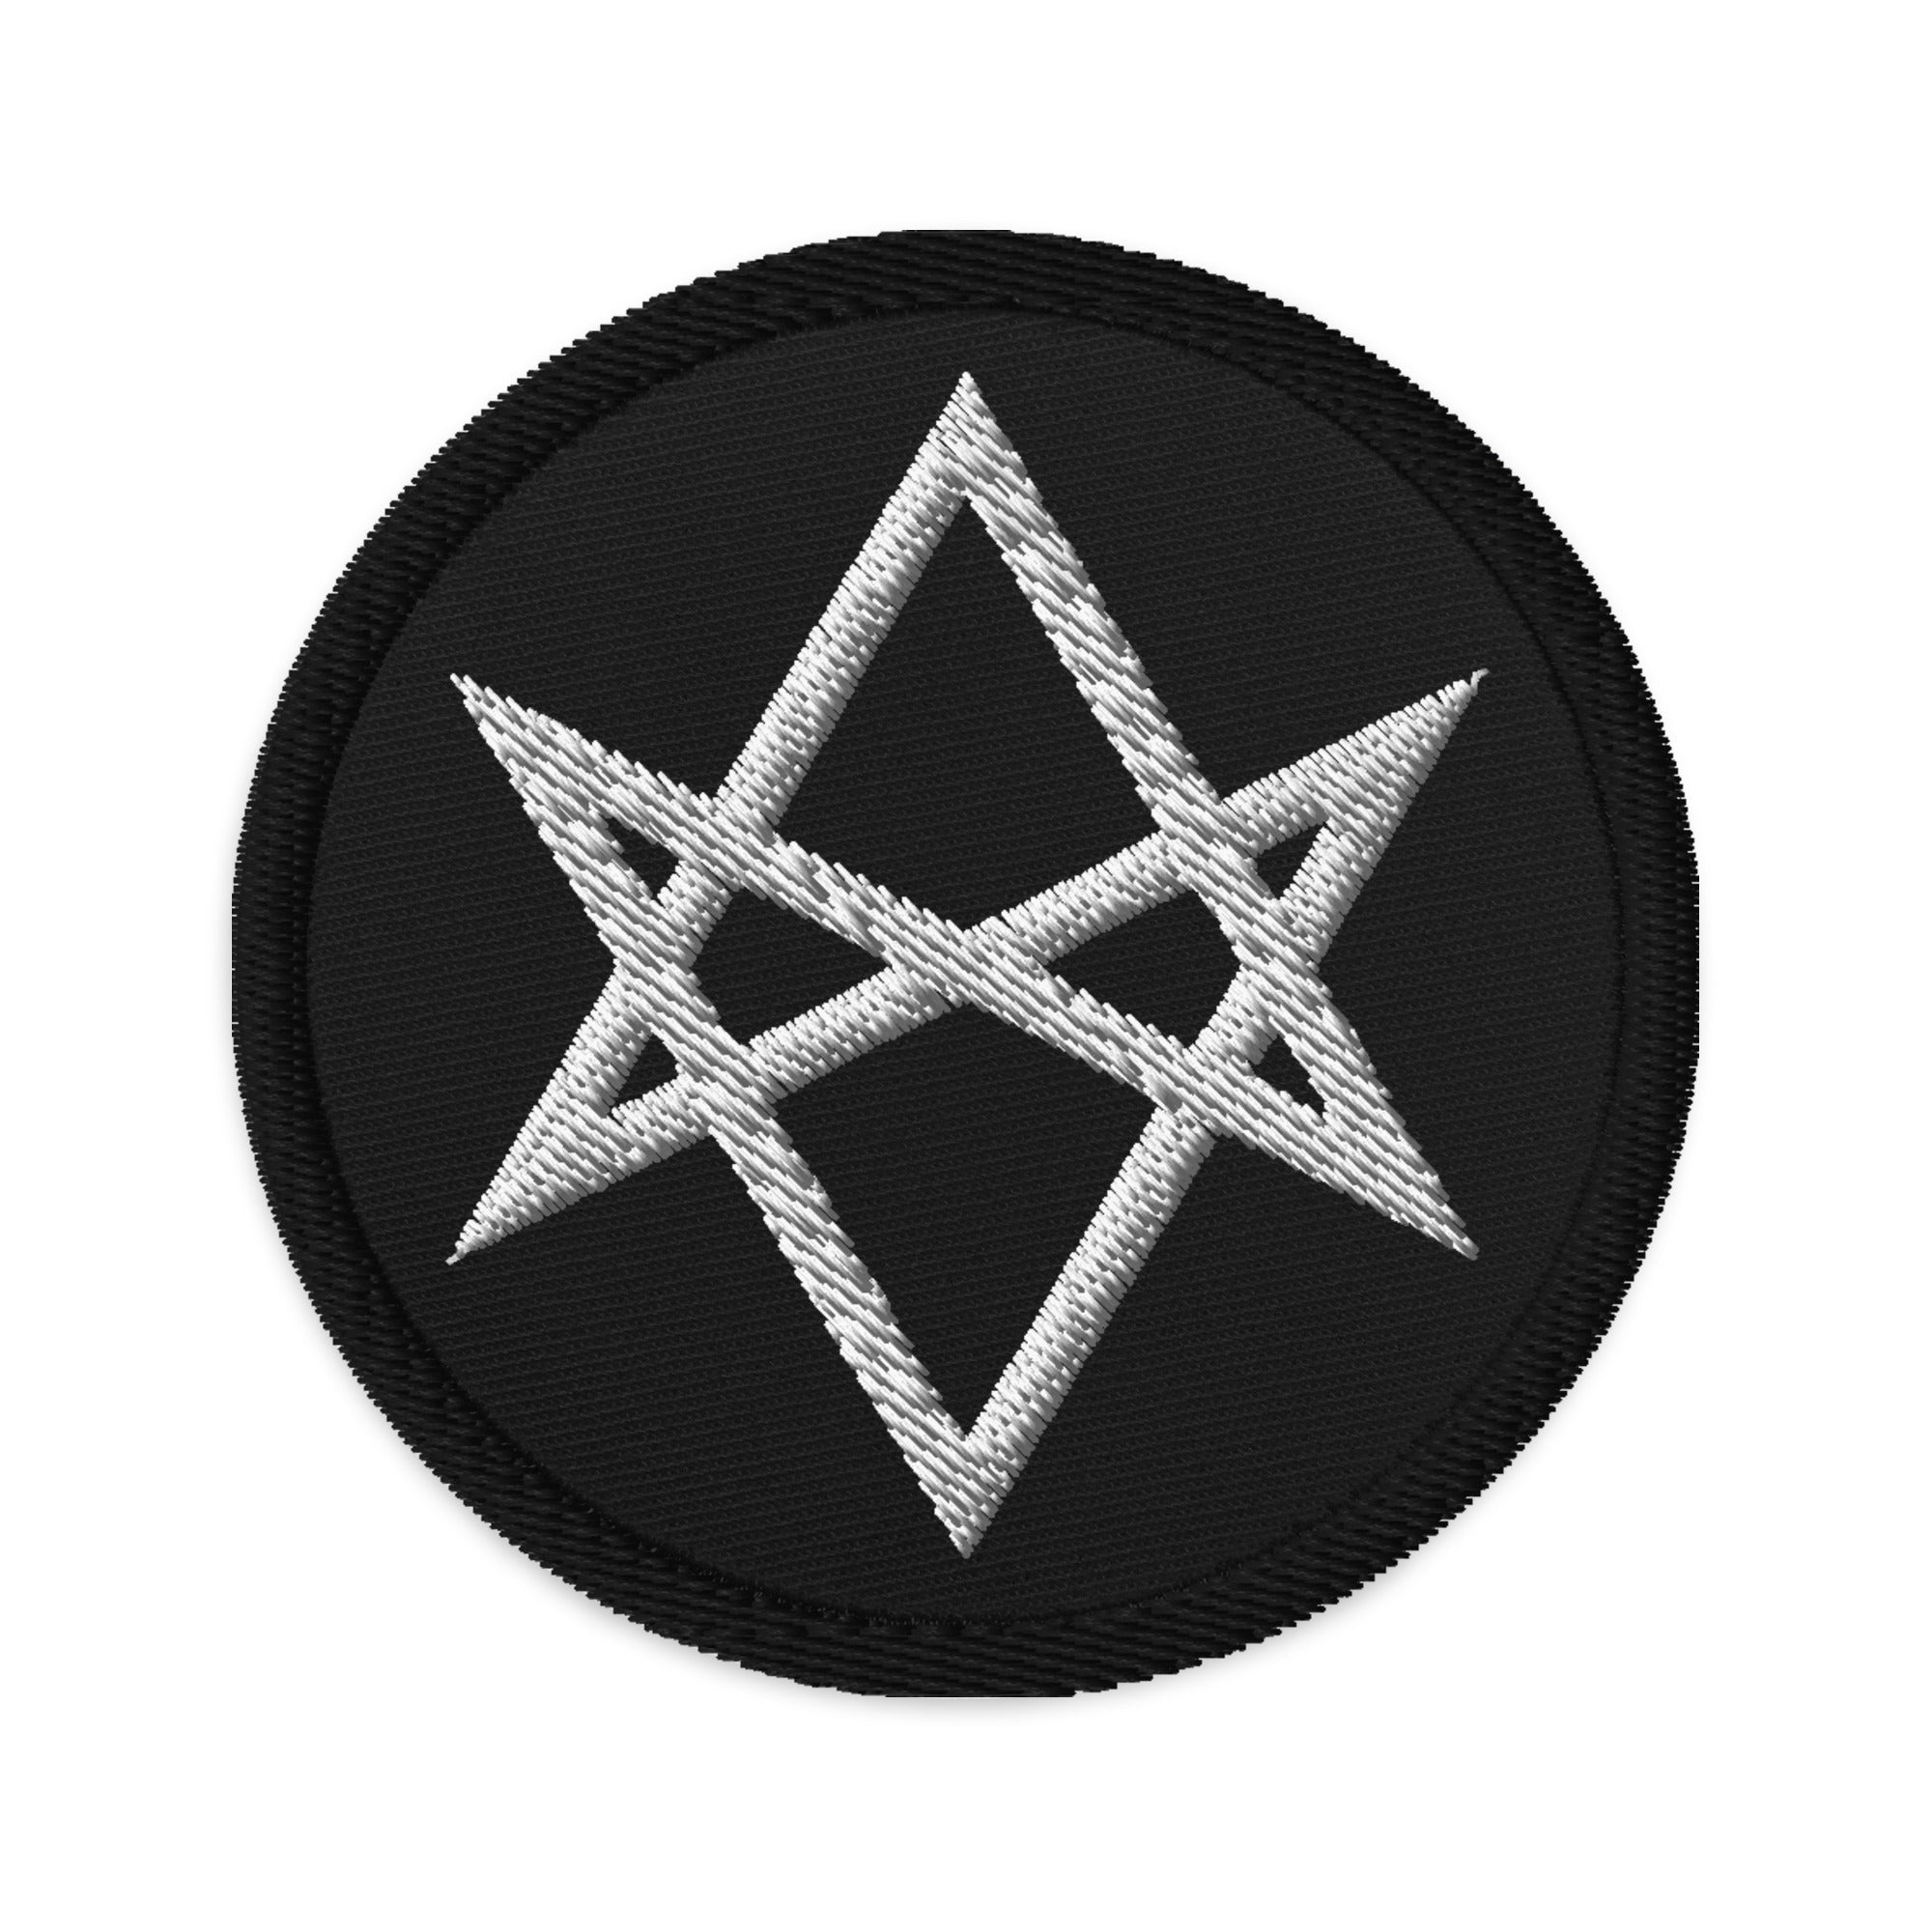 Unicursal Hexagram Six Pointed Star Occult Symbol Embroidered Patch - Edge of Life Designs